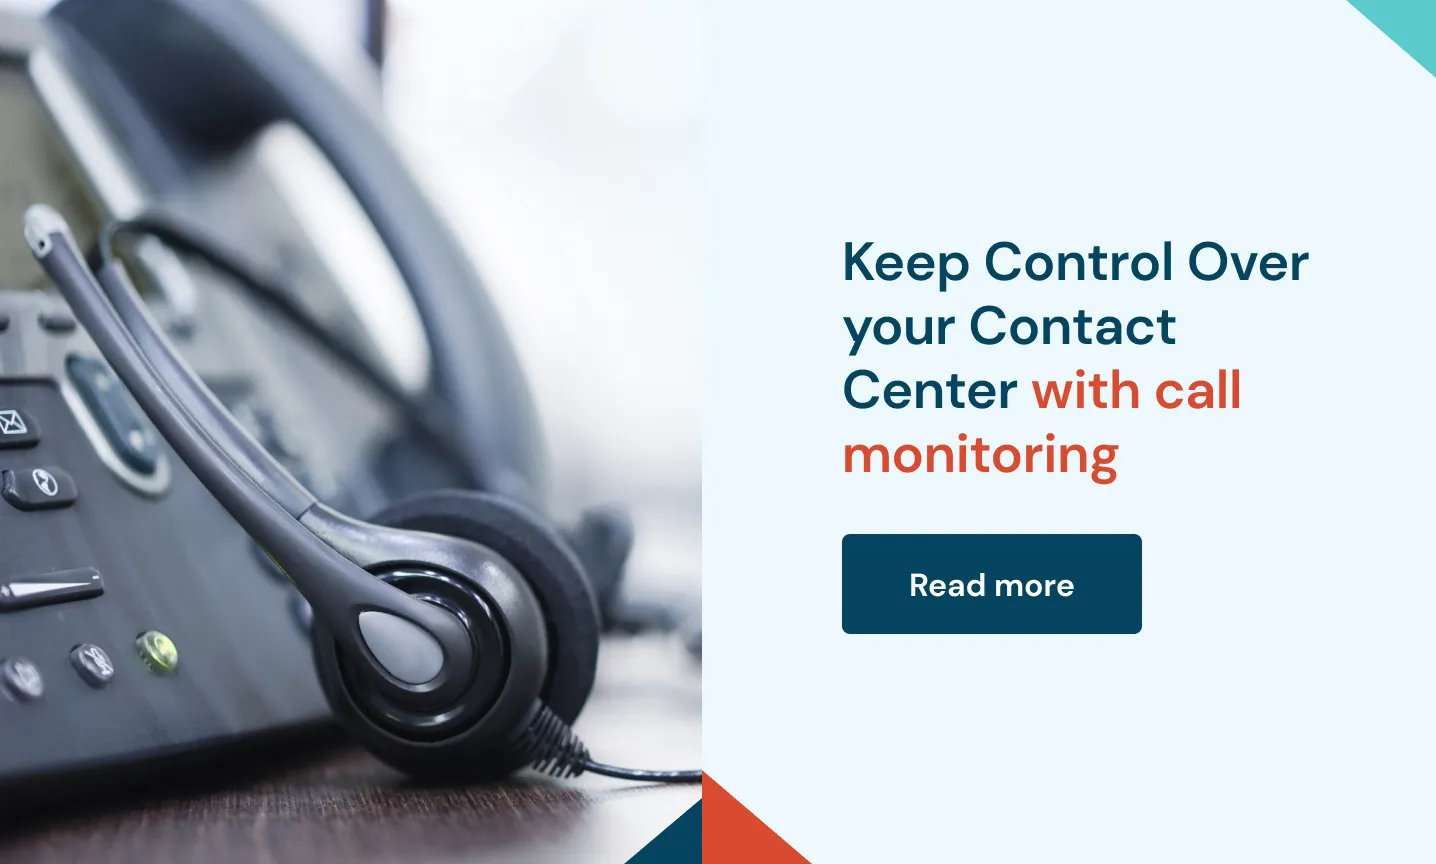 Keep Control Over Your Contact Center